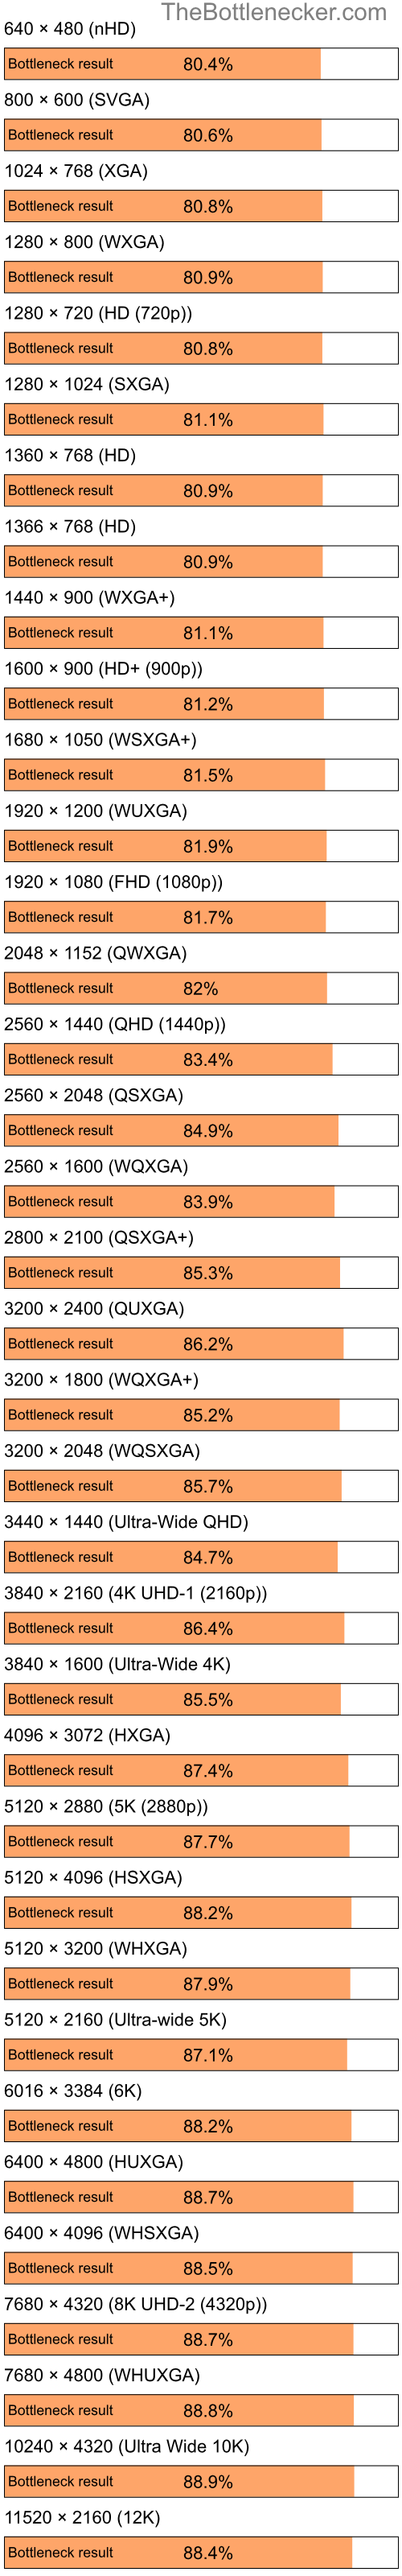 Bottleneck results by resolution for Intel Pentium 4 and NVIDIA GeForce FX 5700 in Graphic Card Intense Tasks